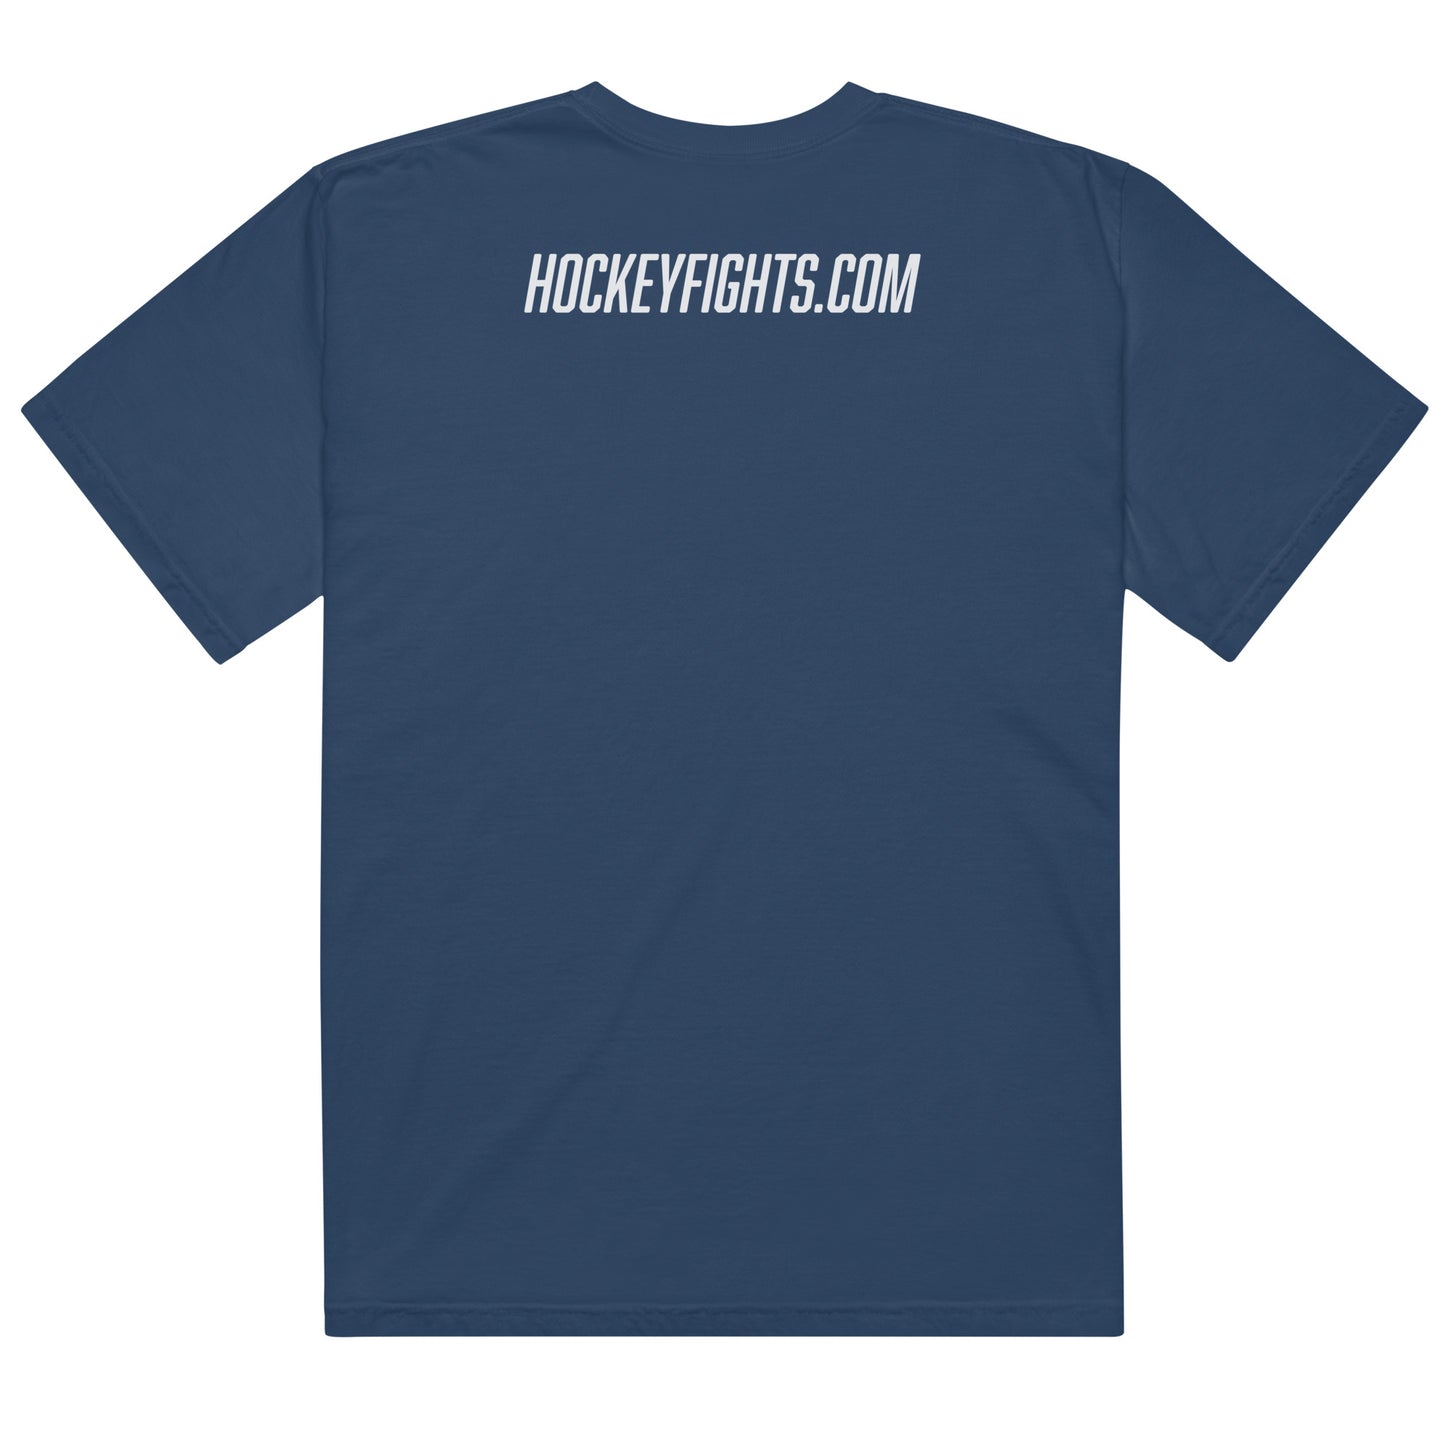 THE CLASSICS - Hockey Fights Left Chest T-Shirt